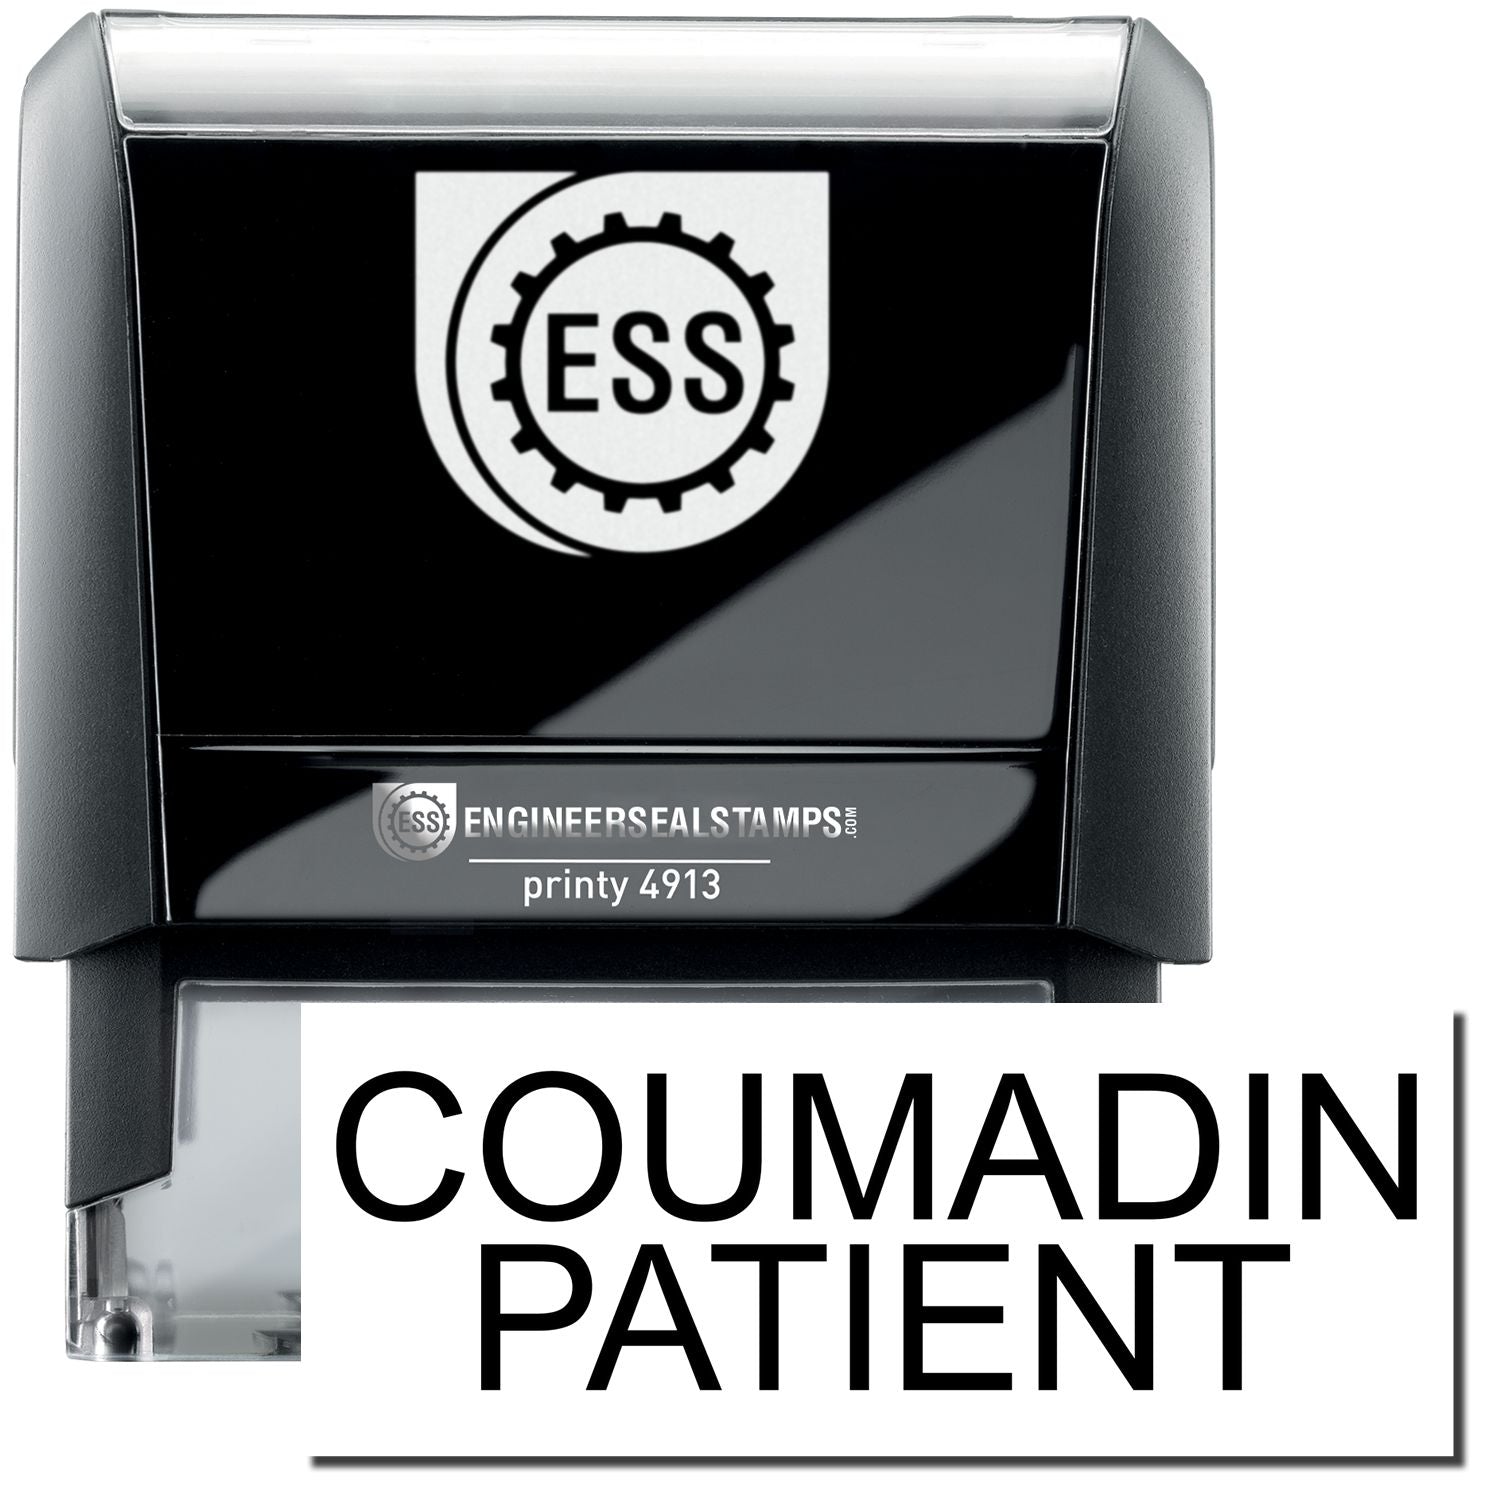 A self-inking stamp with a stamped image showing how the text "COUMADIN PATIENT" in a large bold font is displayed by it.